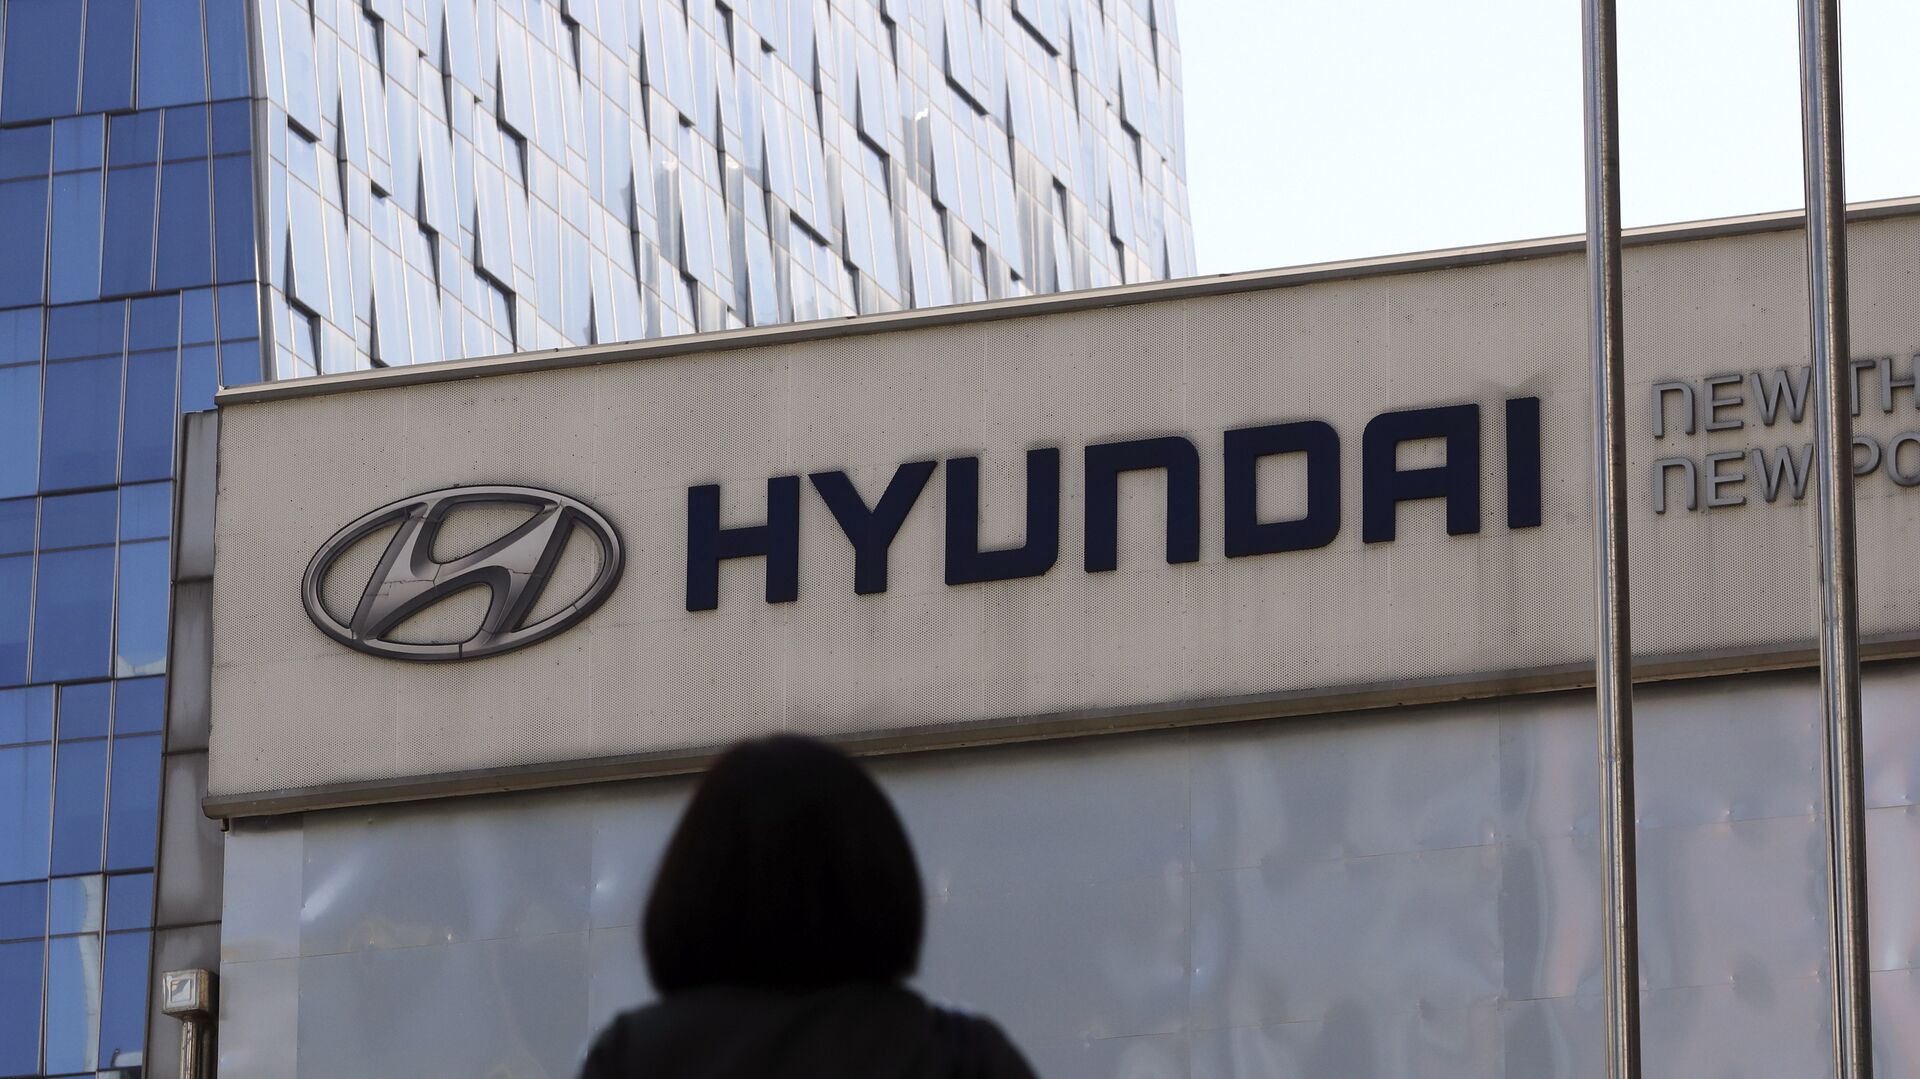 The logo of Hyundai Motor Co. is displayed at the automaker's showroom in Seoul, South Korea, Wednesday, April 26, 2017 - Sputnik International, 1920, 27.01.2022